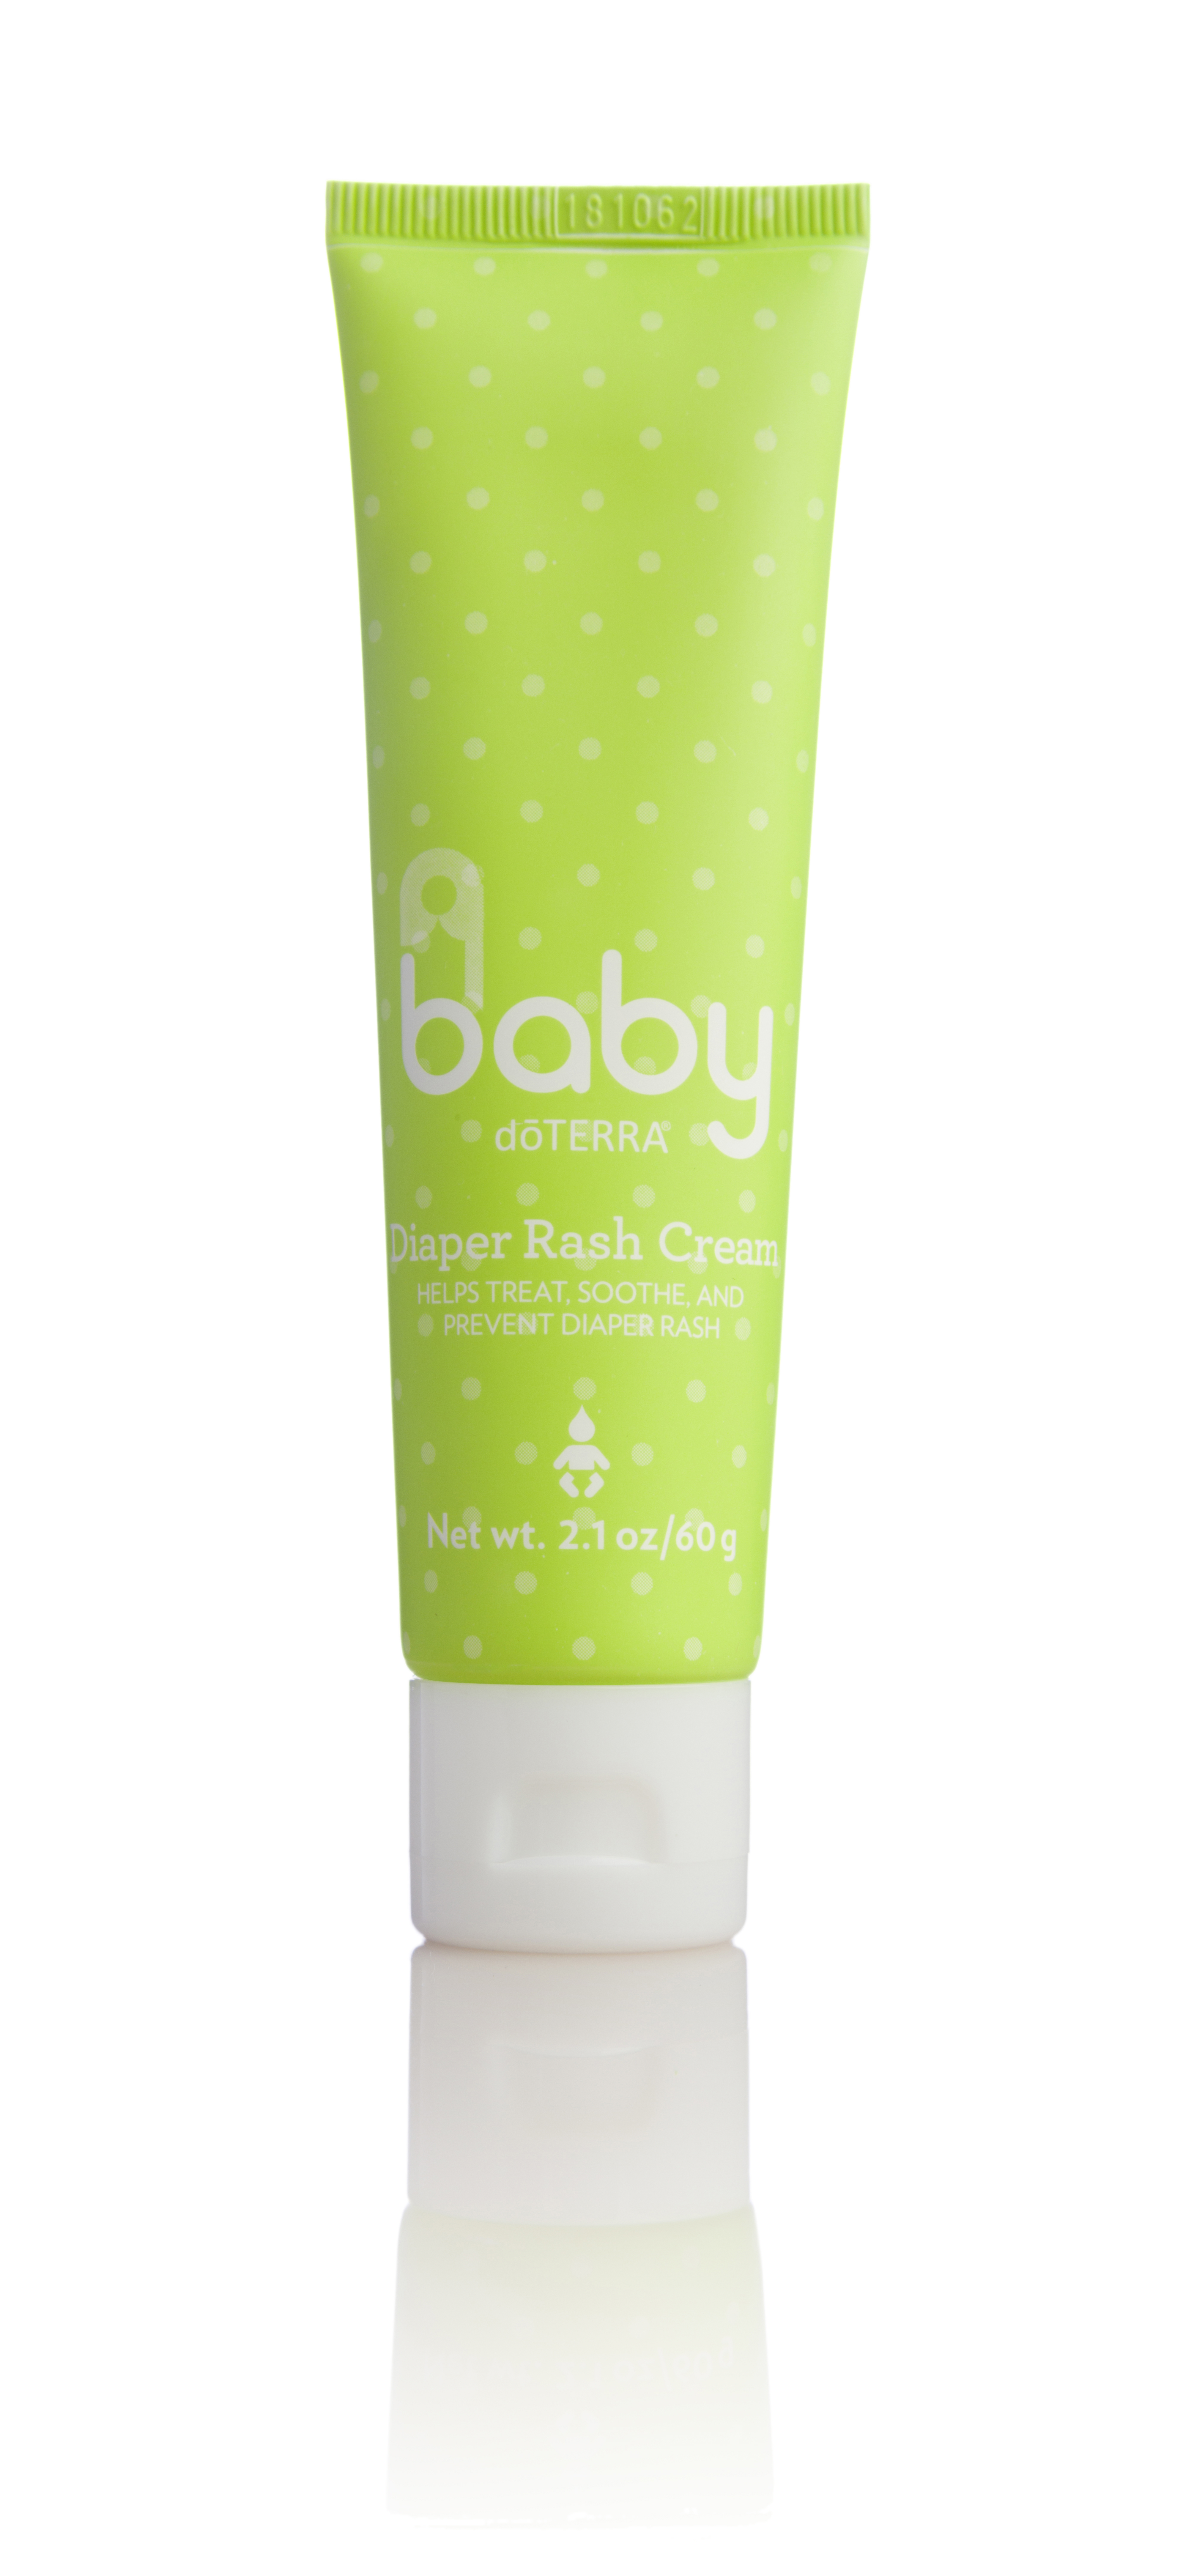 what to use for diaper rash cream